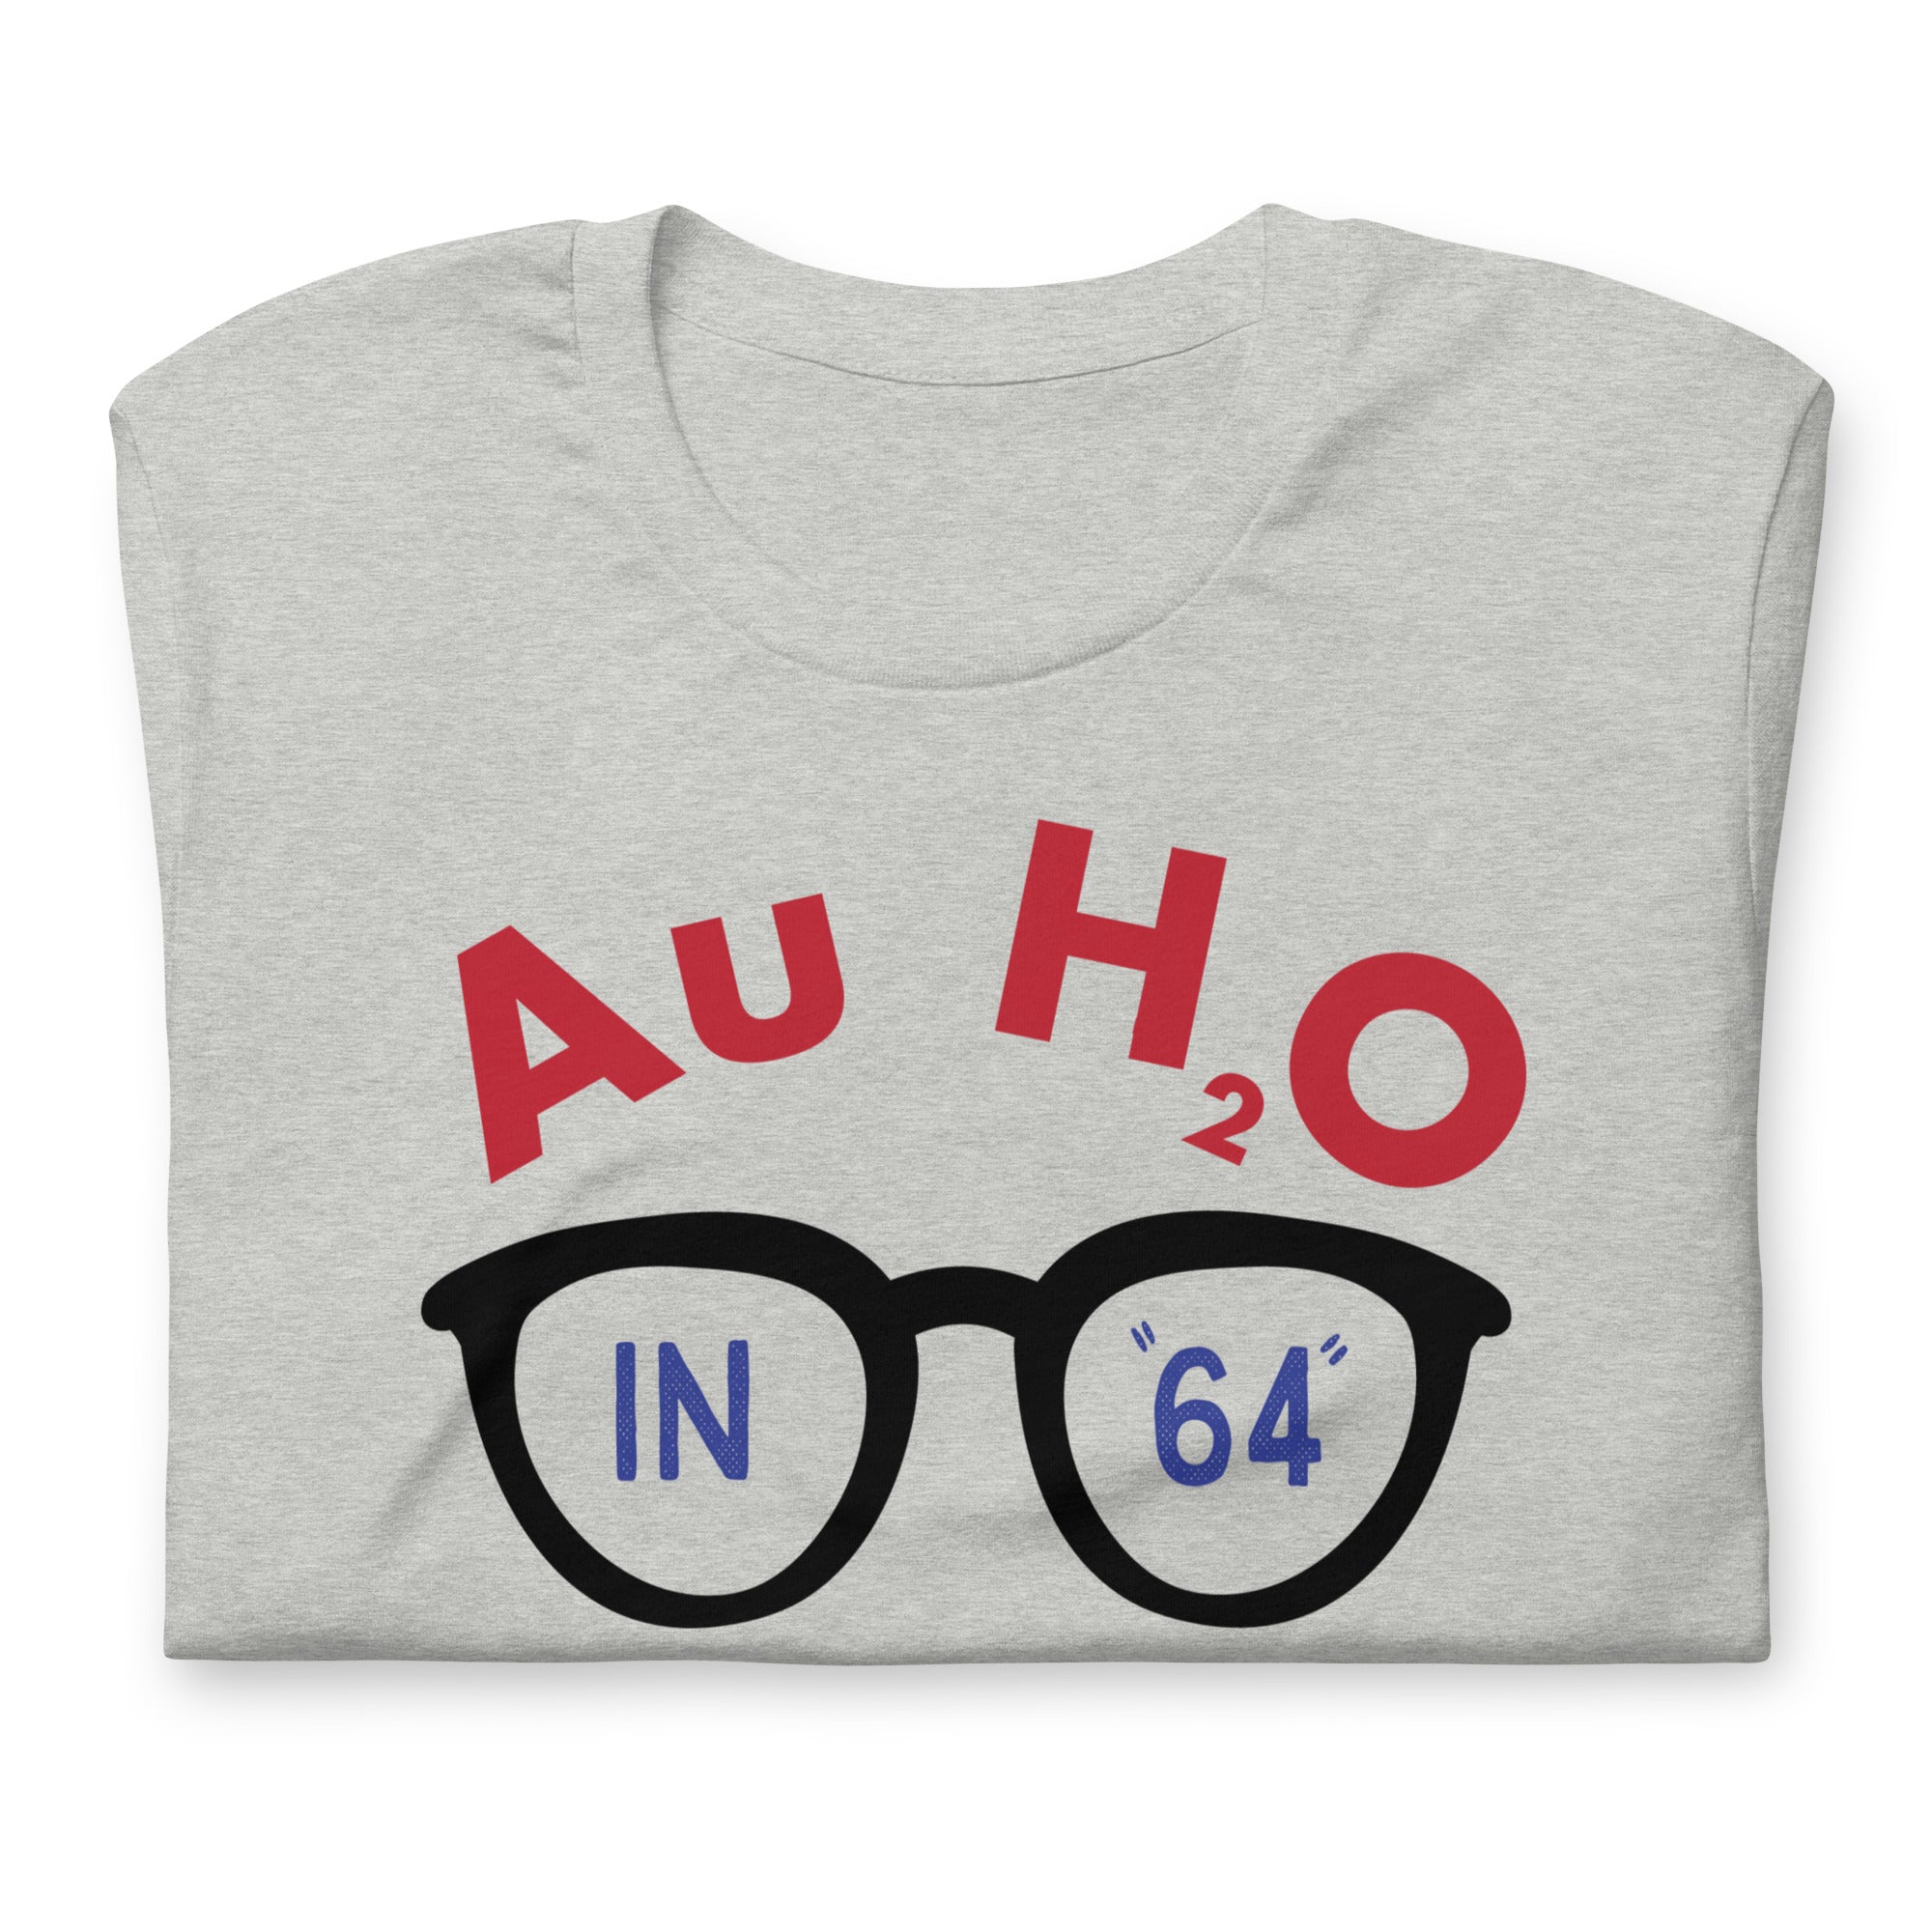 Goldwater Vintage Au H2O In 64 T-Shirts